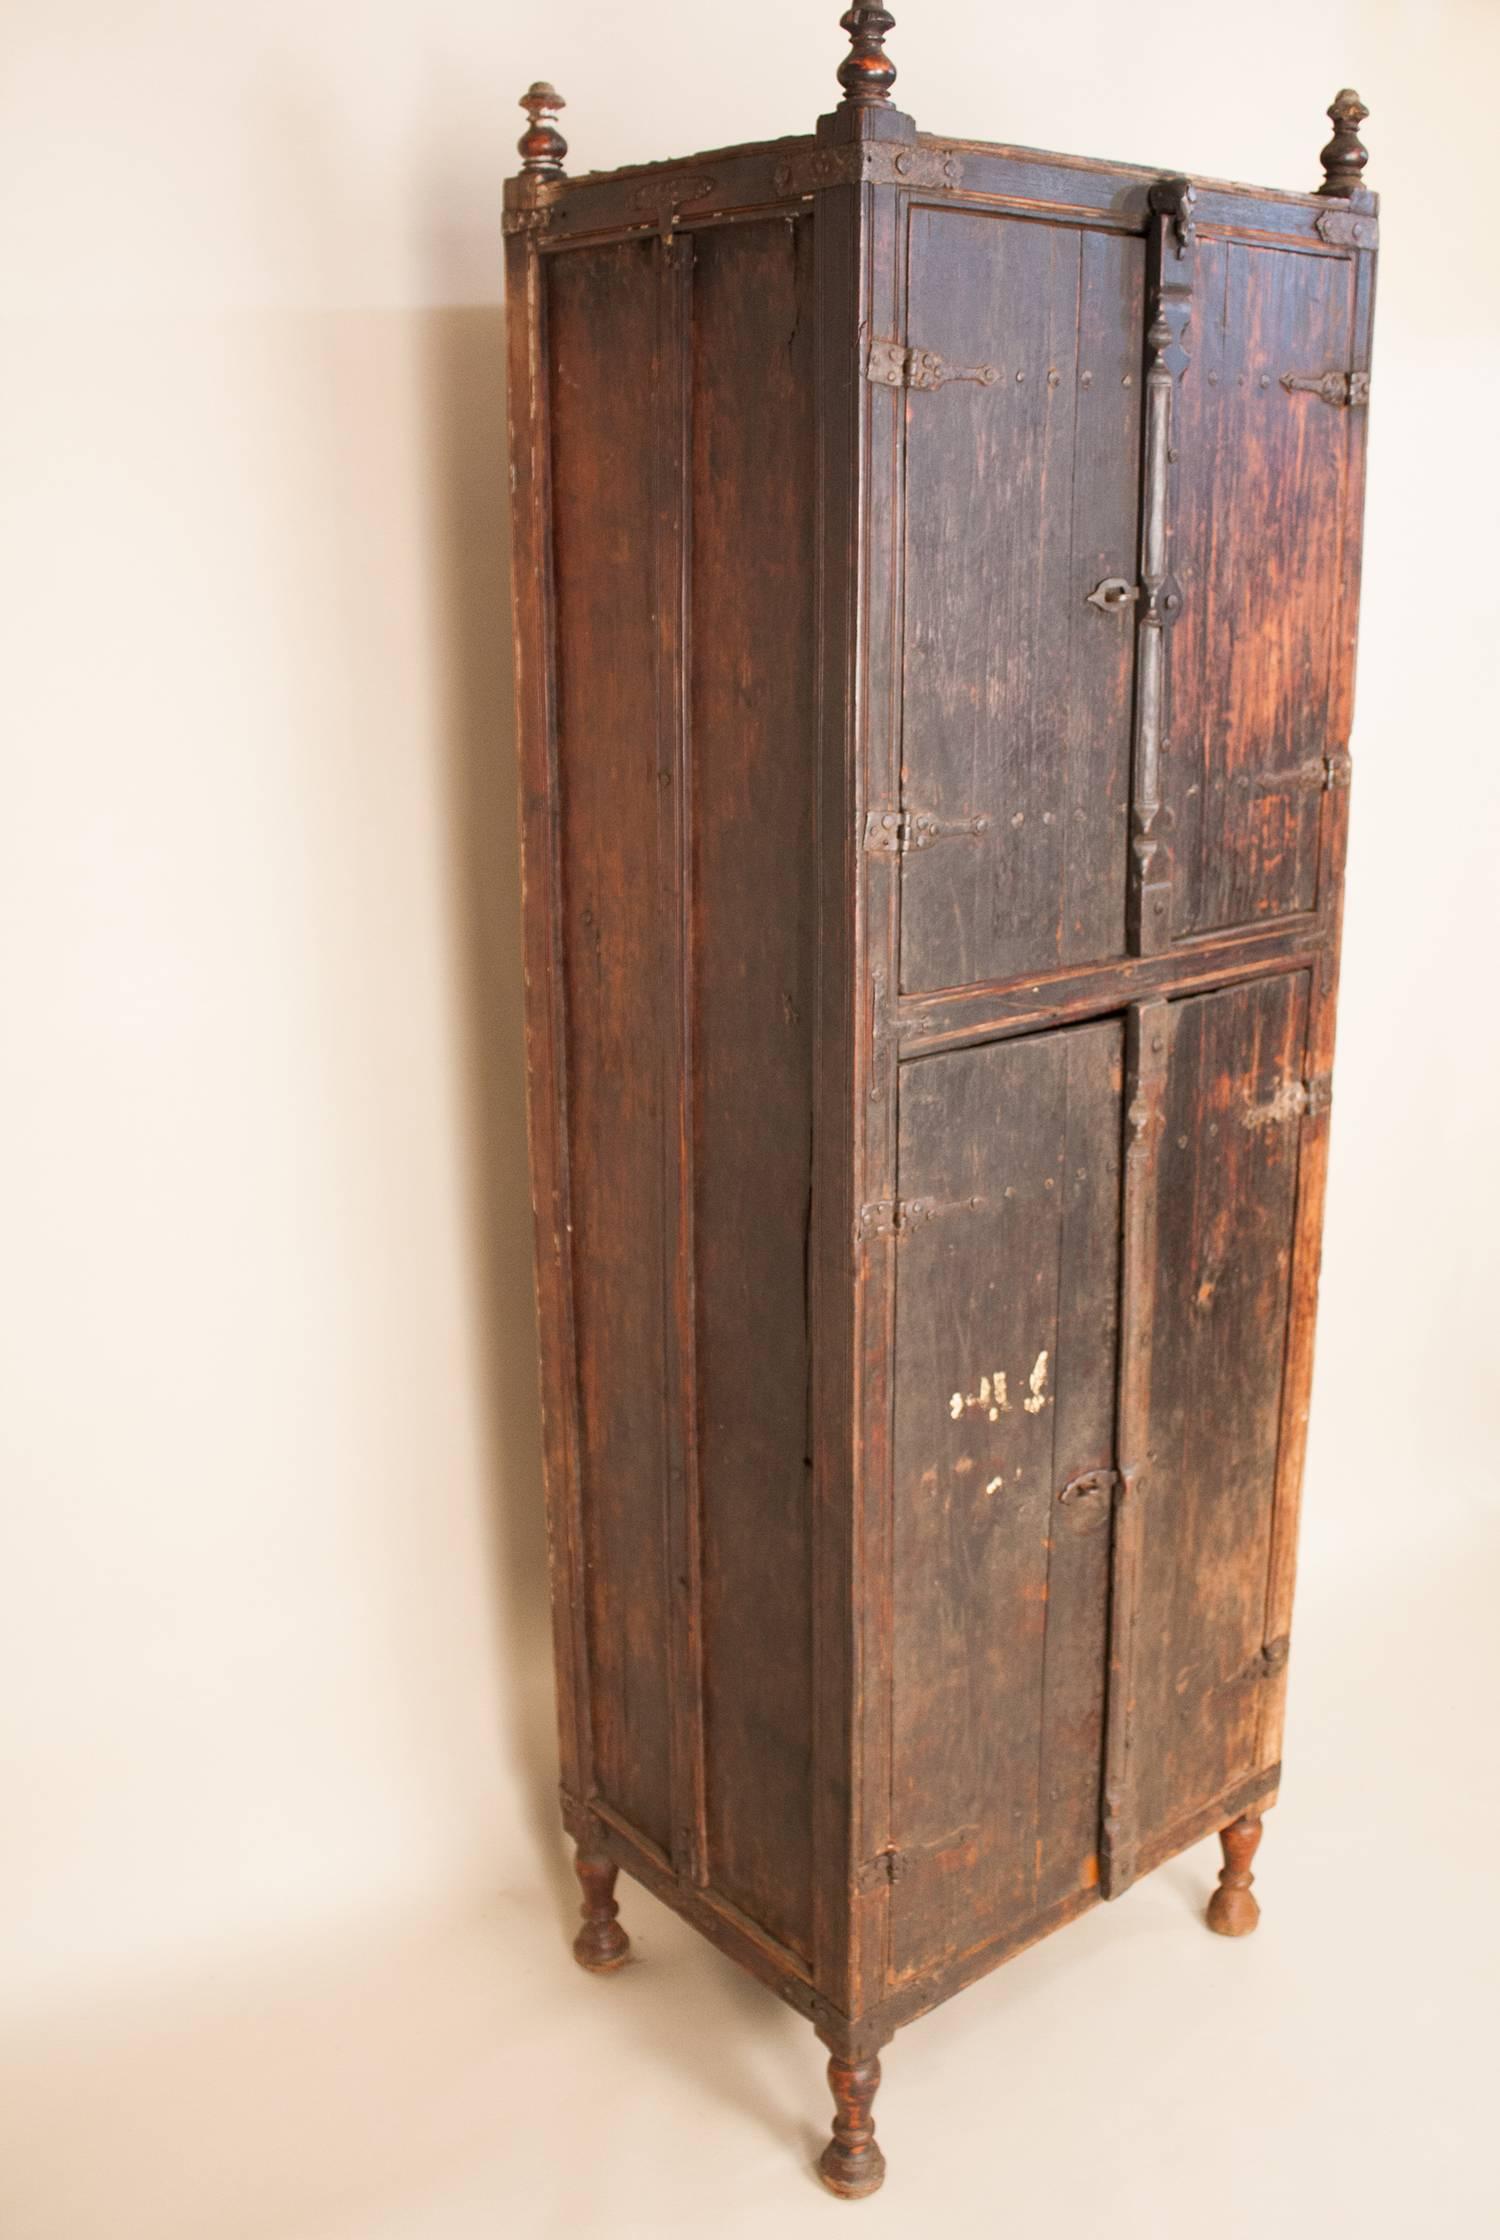 A tall, slender primitive cabinet from Portuguese Goa, circa 1850. This antique cupboard is in its original condition and has smithed iron straps, hinges and hardware, including bent handmade nails, that add great character to the piece. The wood